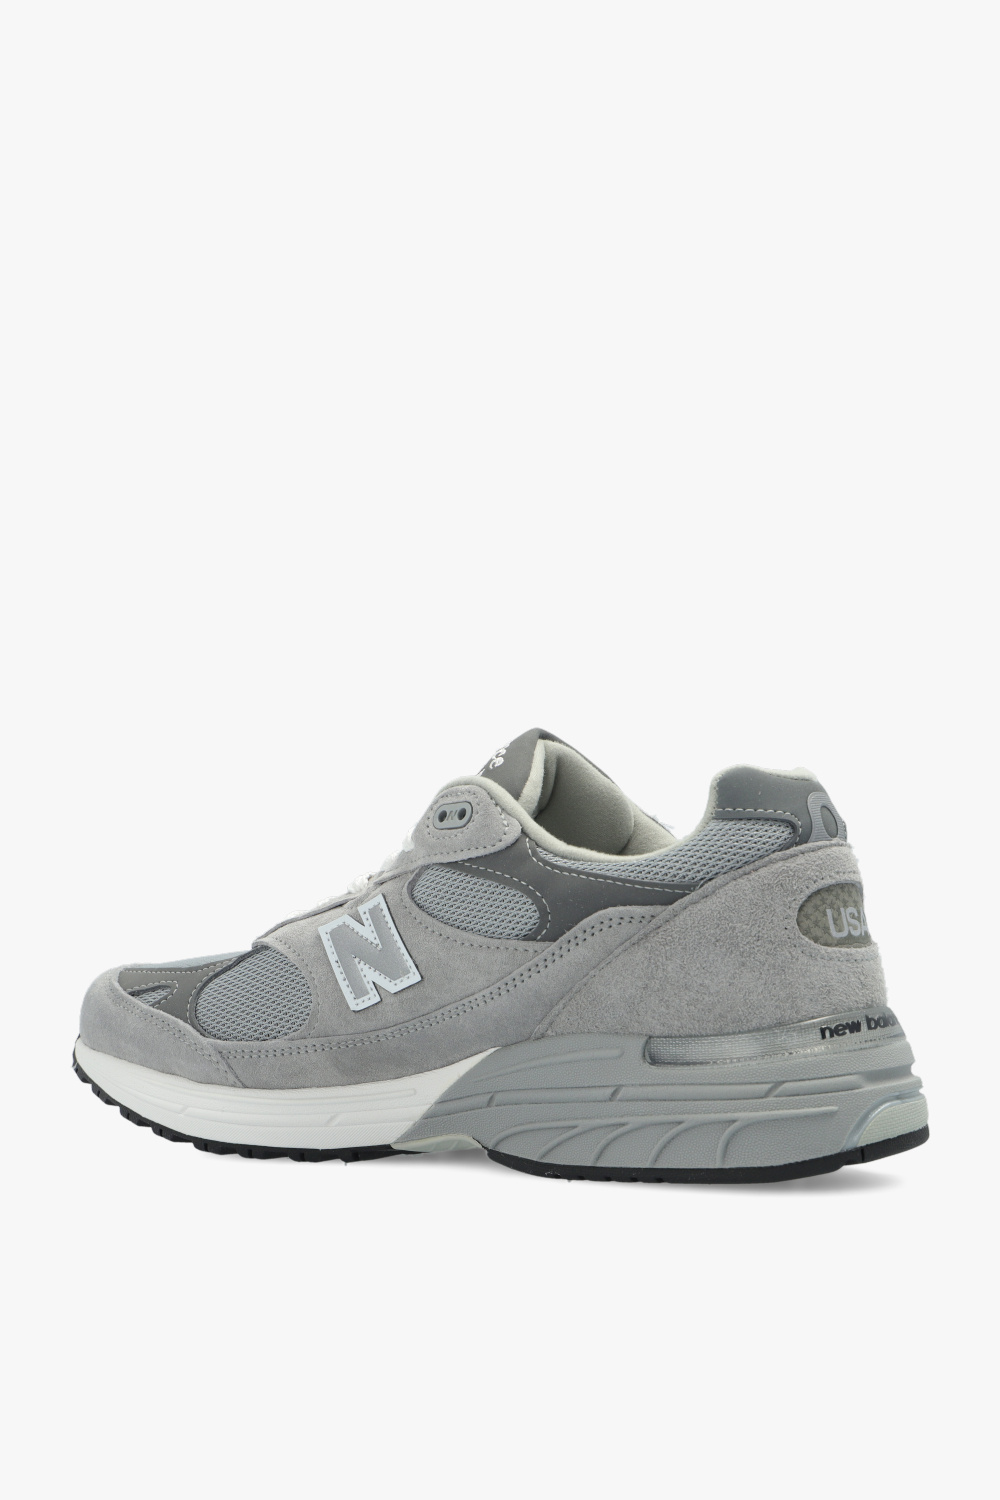 New Balance ‘MR993GL’ sneakers from ‘Made in UK’ series